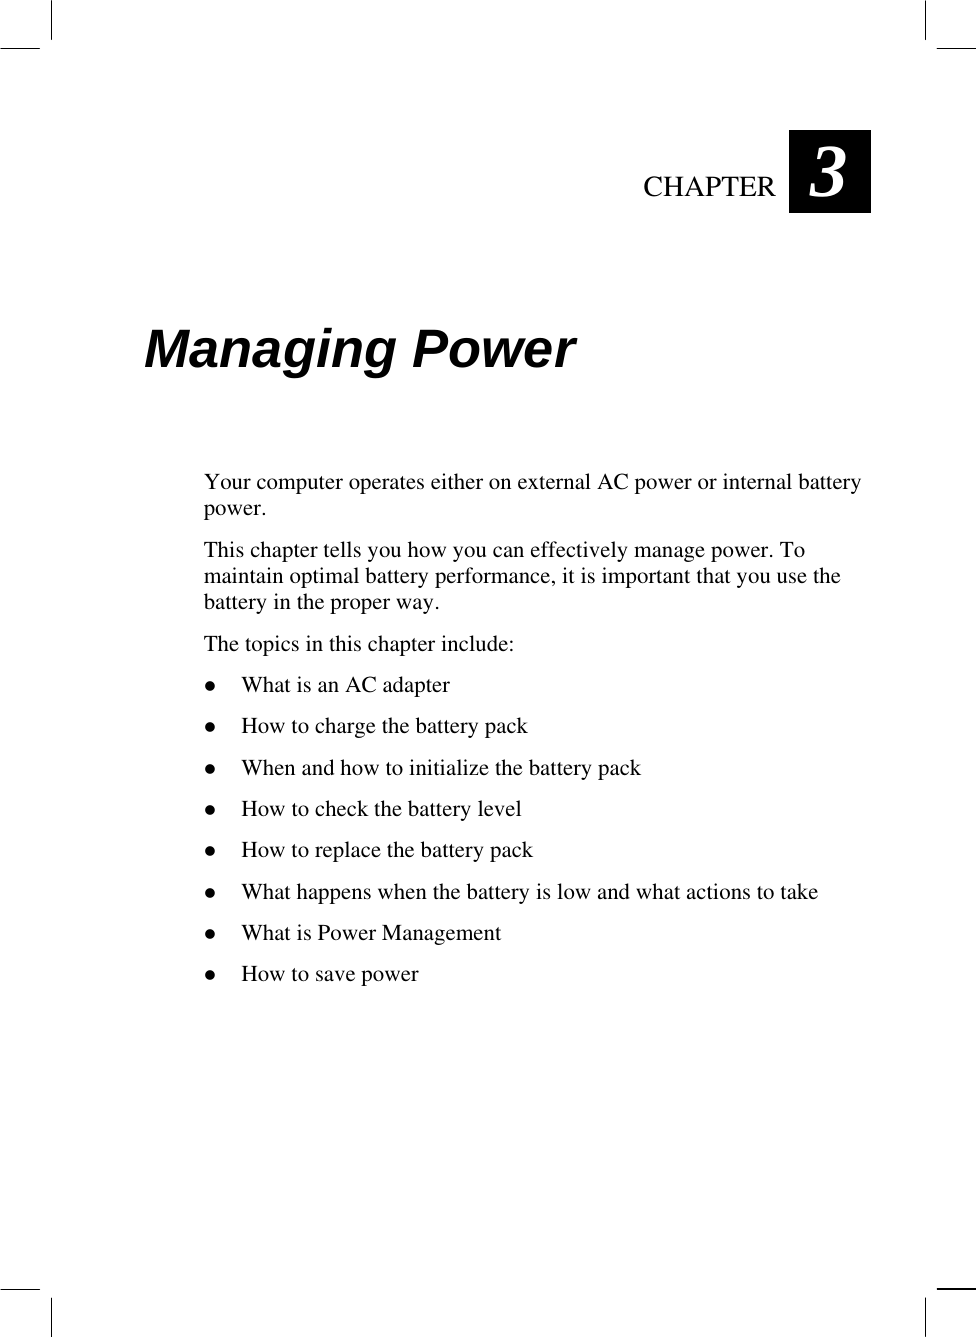  CHAPTER  3 Managing Power Your computer operates either on external AC power or internal battery power. This chapter tells you how you can effectively manage power. To maintain optimal battery performance, it is important that you use the battery in the proper way. The topics in this chapter include:   What is an AC adapter   How to charge the battery pack   When and how to initialize the battery pack   How to check the battery level   How to replace the battery pack   What happens when the battery is low and what actions to take   What is Power Management   How to save power  